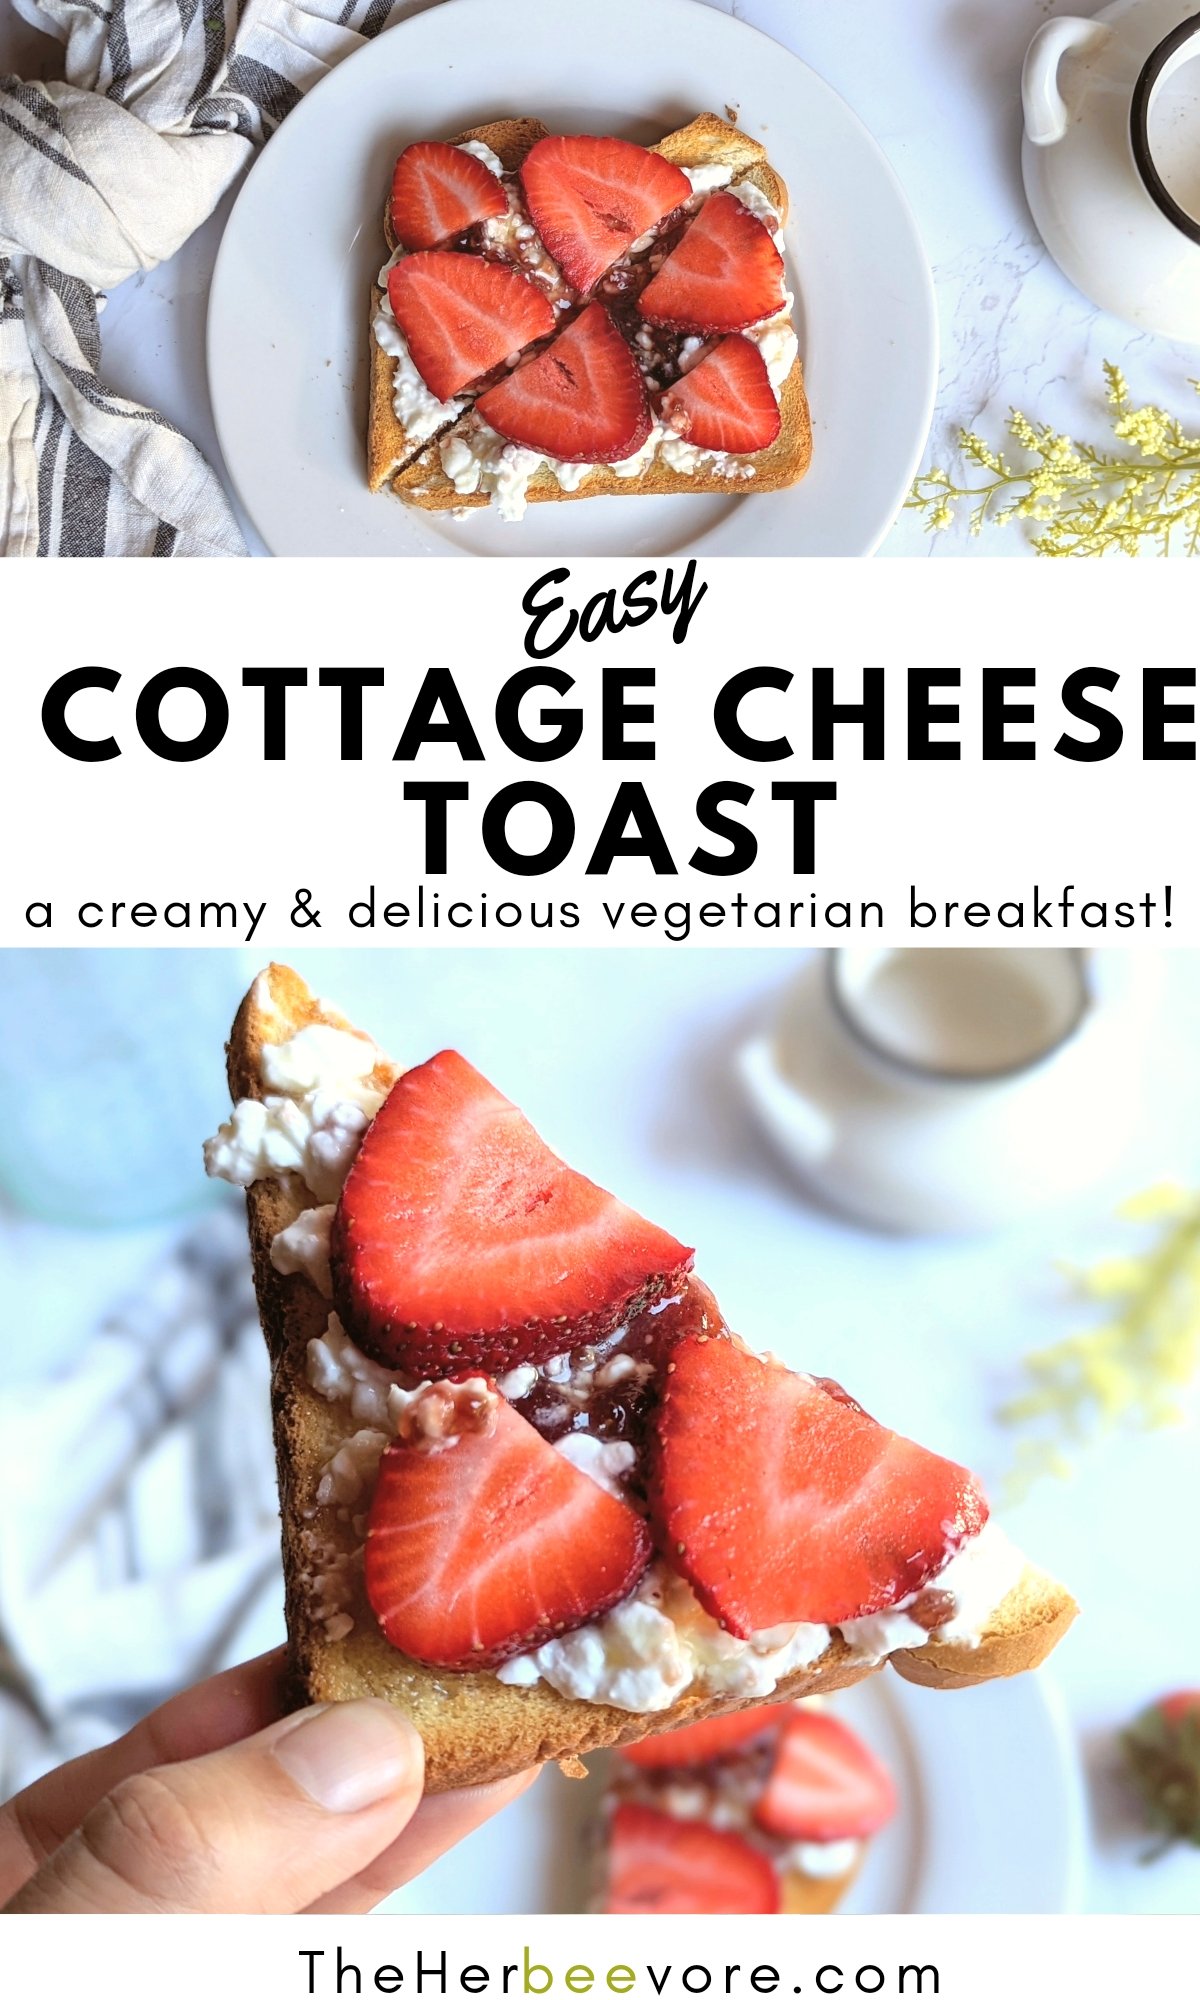 Cottage Cheese Toast with Fruit Recipe (Vegetarian, High Protein)